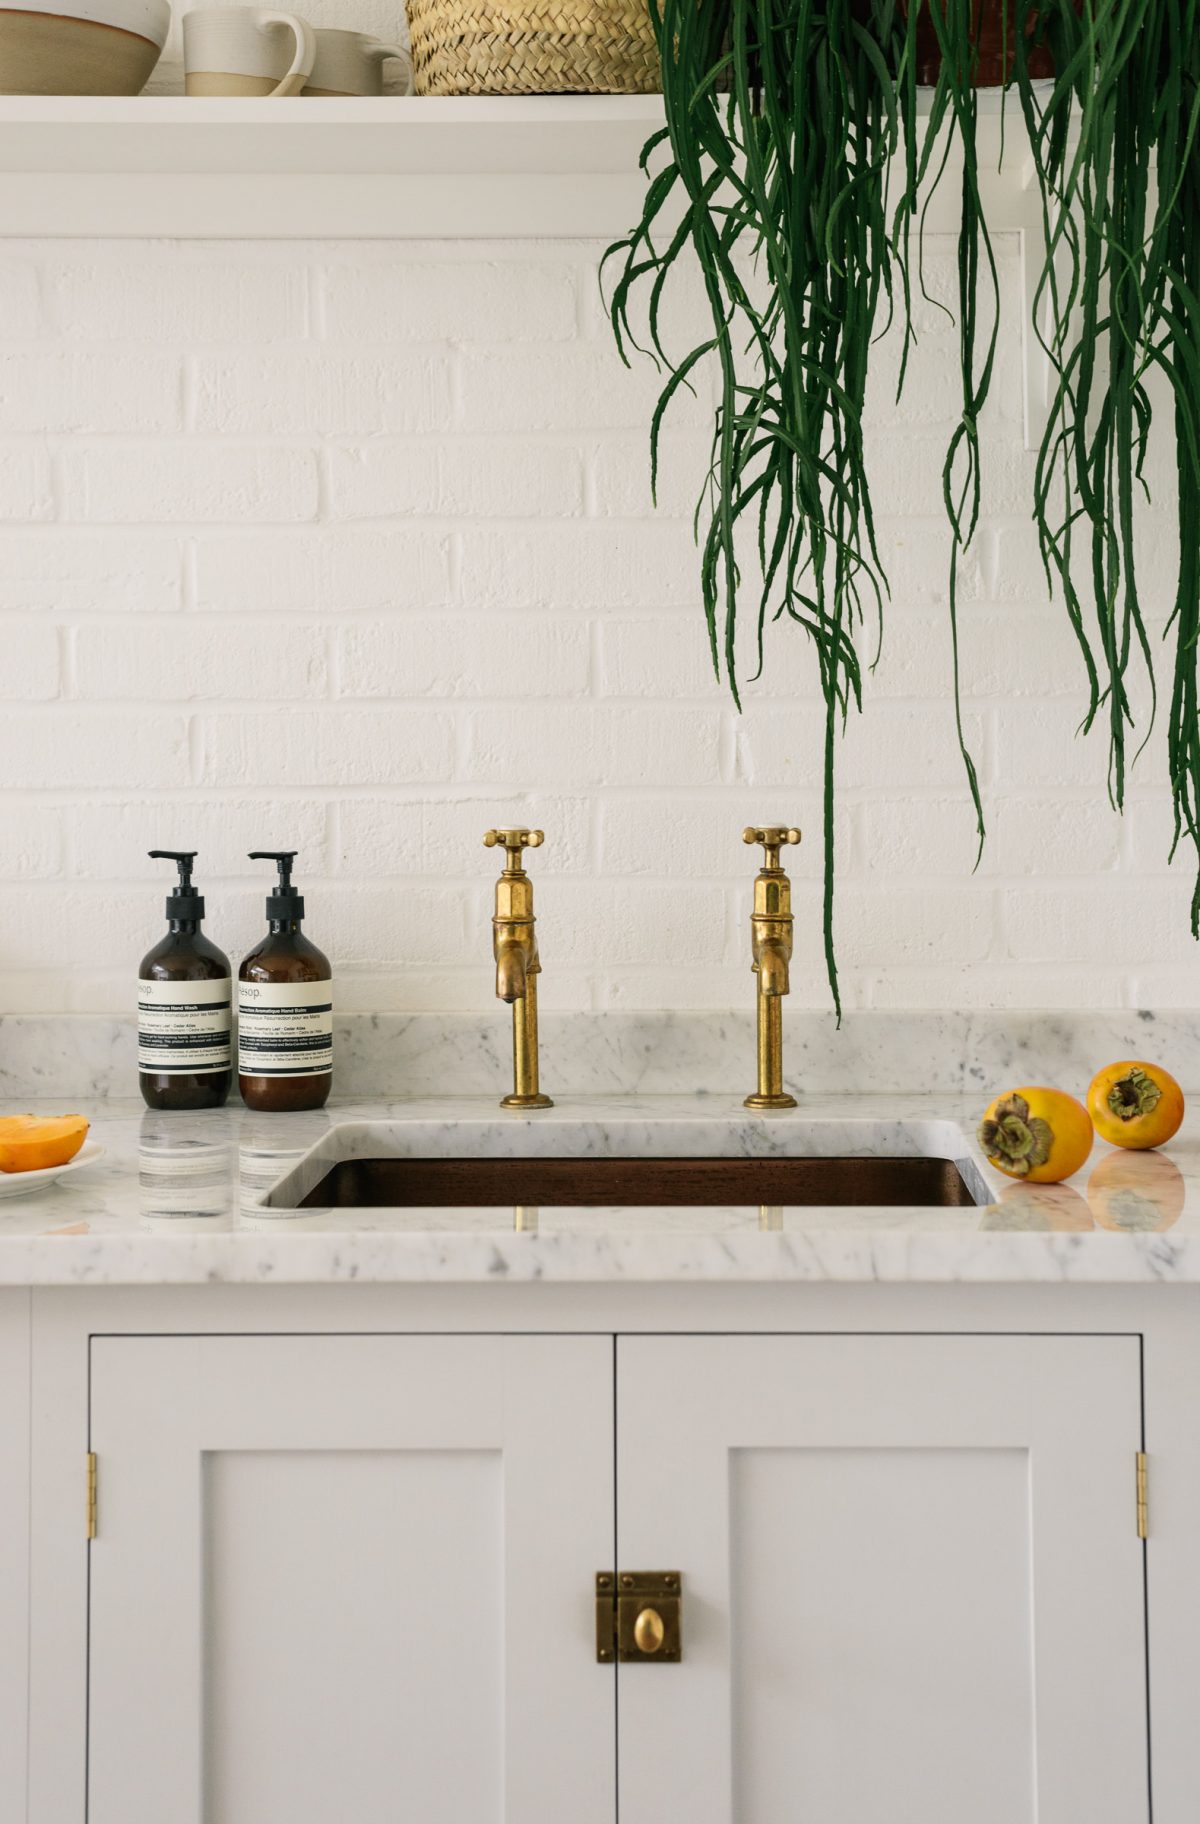 The Strawberry Hill Kitchen features a polished Carrara marble worktop, notice the lovely reflections on this surface. 